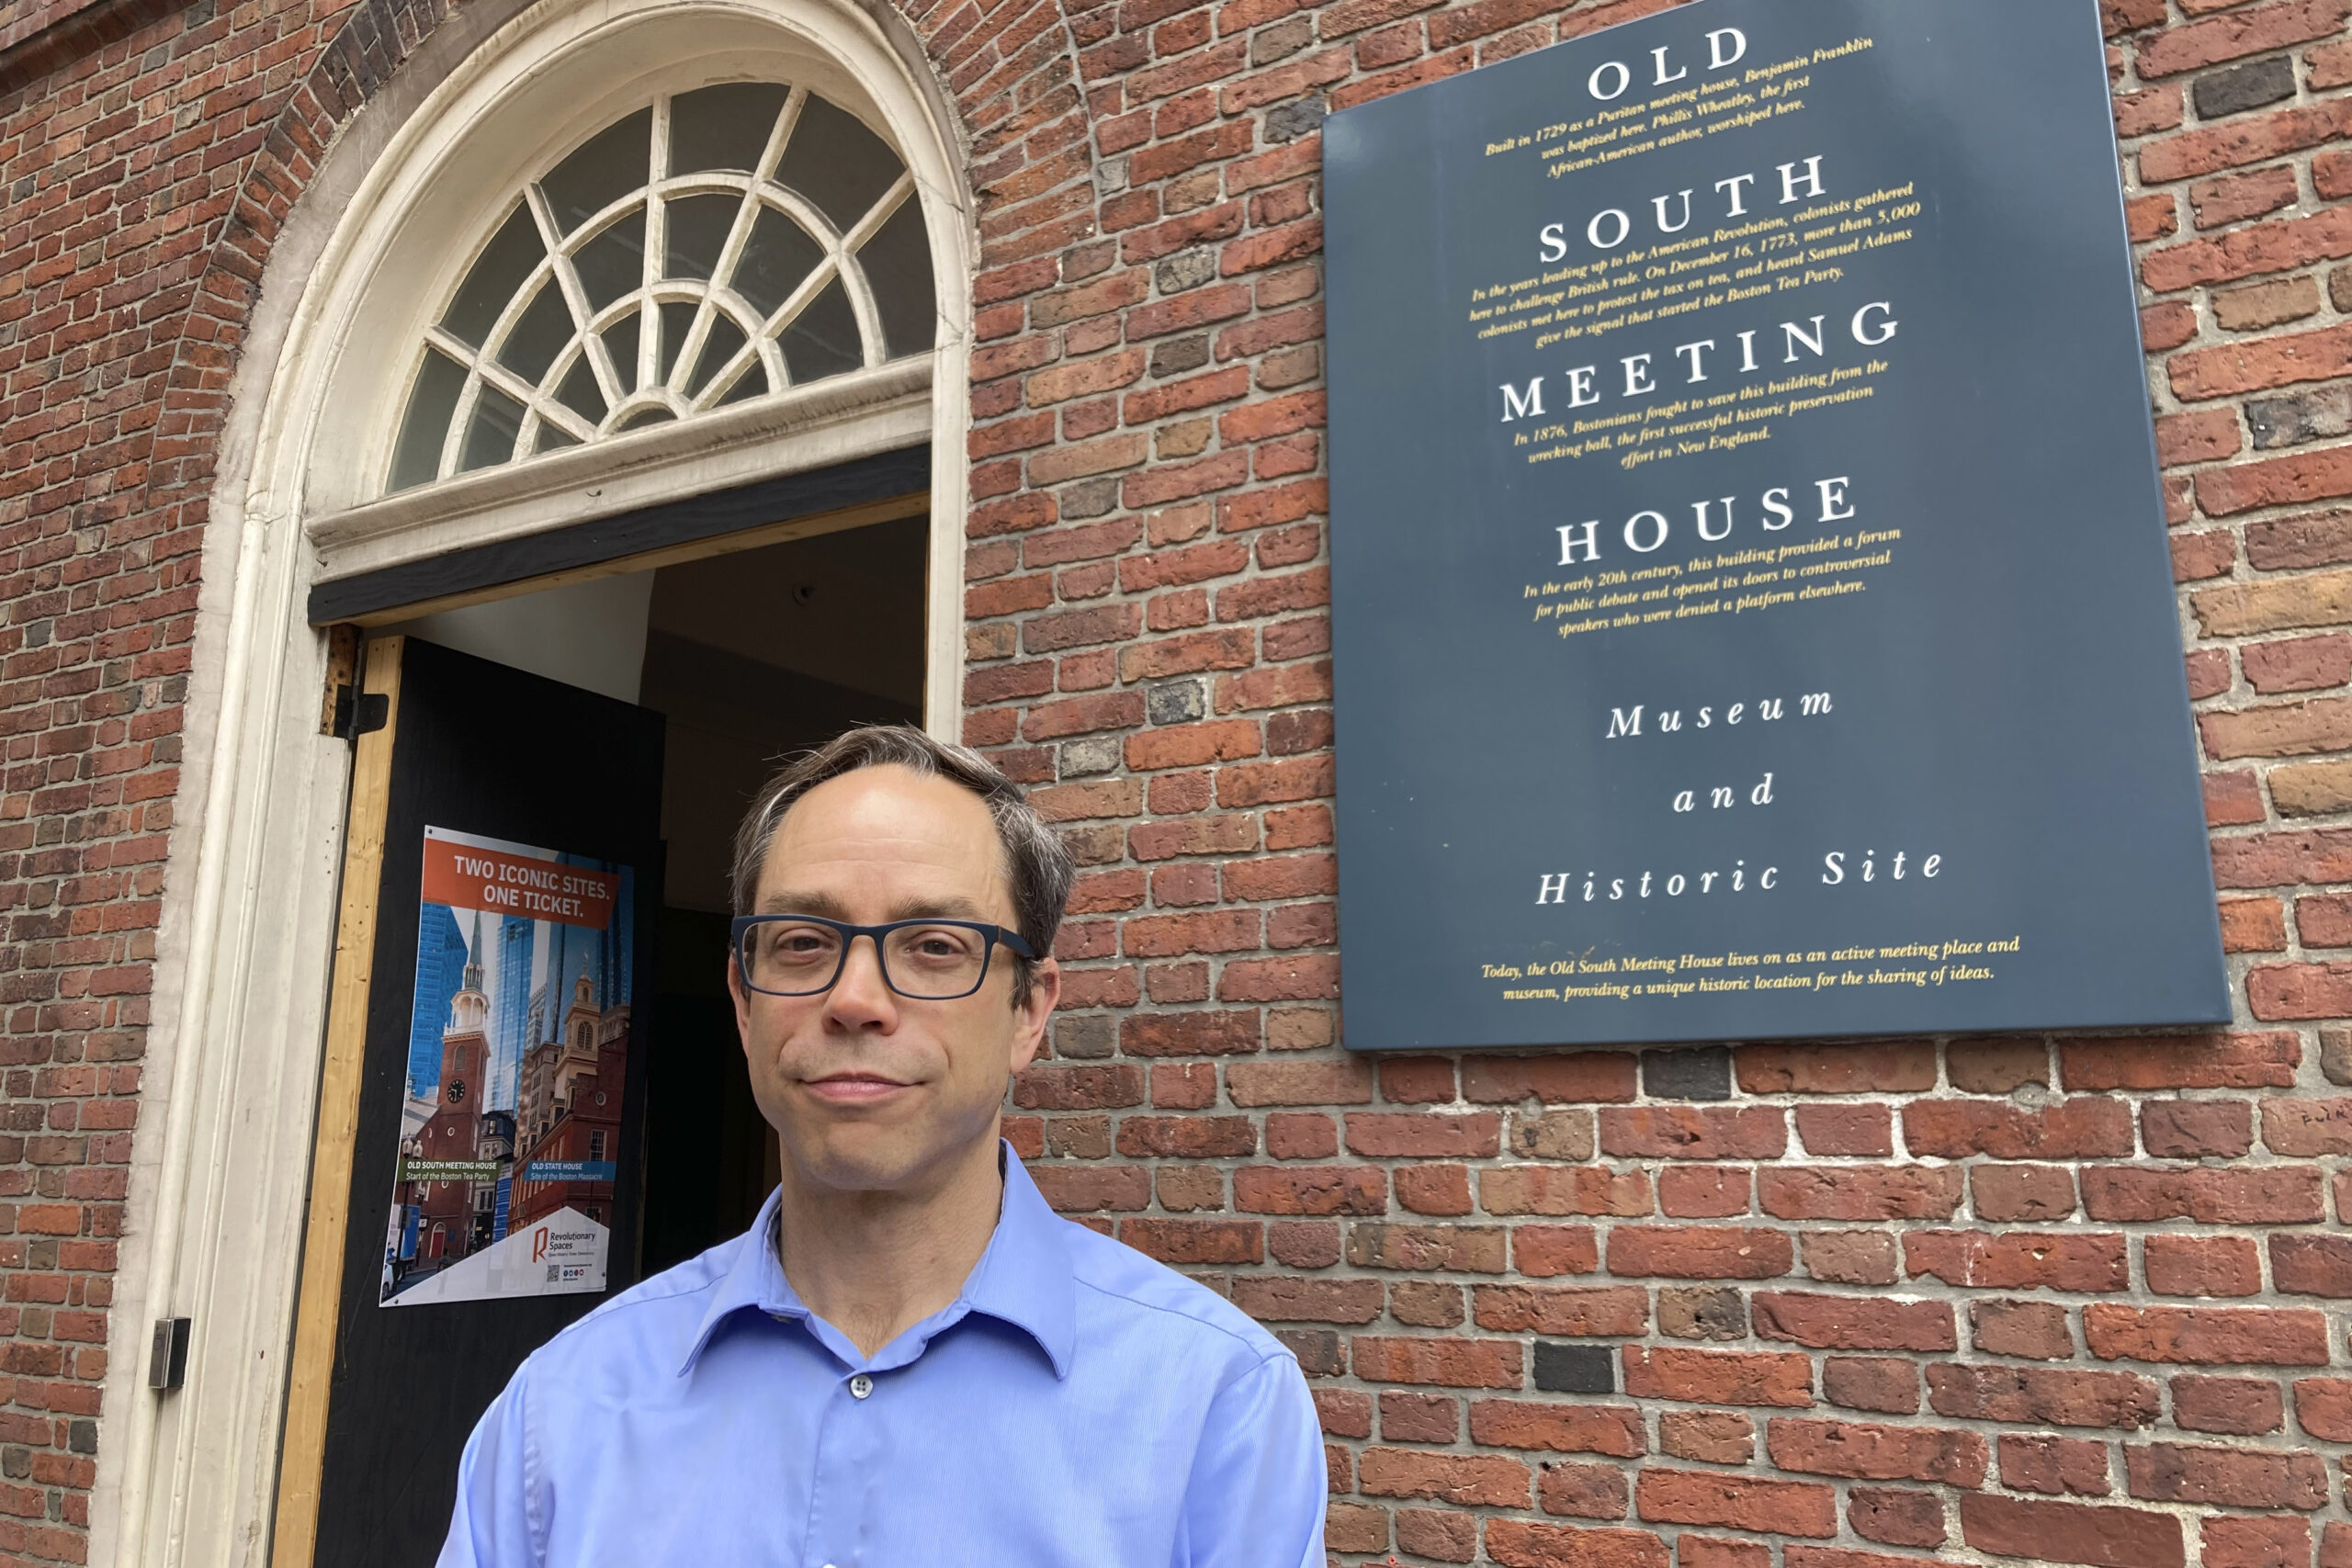 Nathaniel Sheidley, president and CEO of Revolutionary Spaces, stands outside the Old South Meeting...